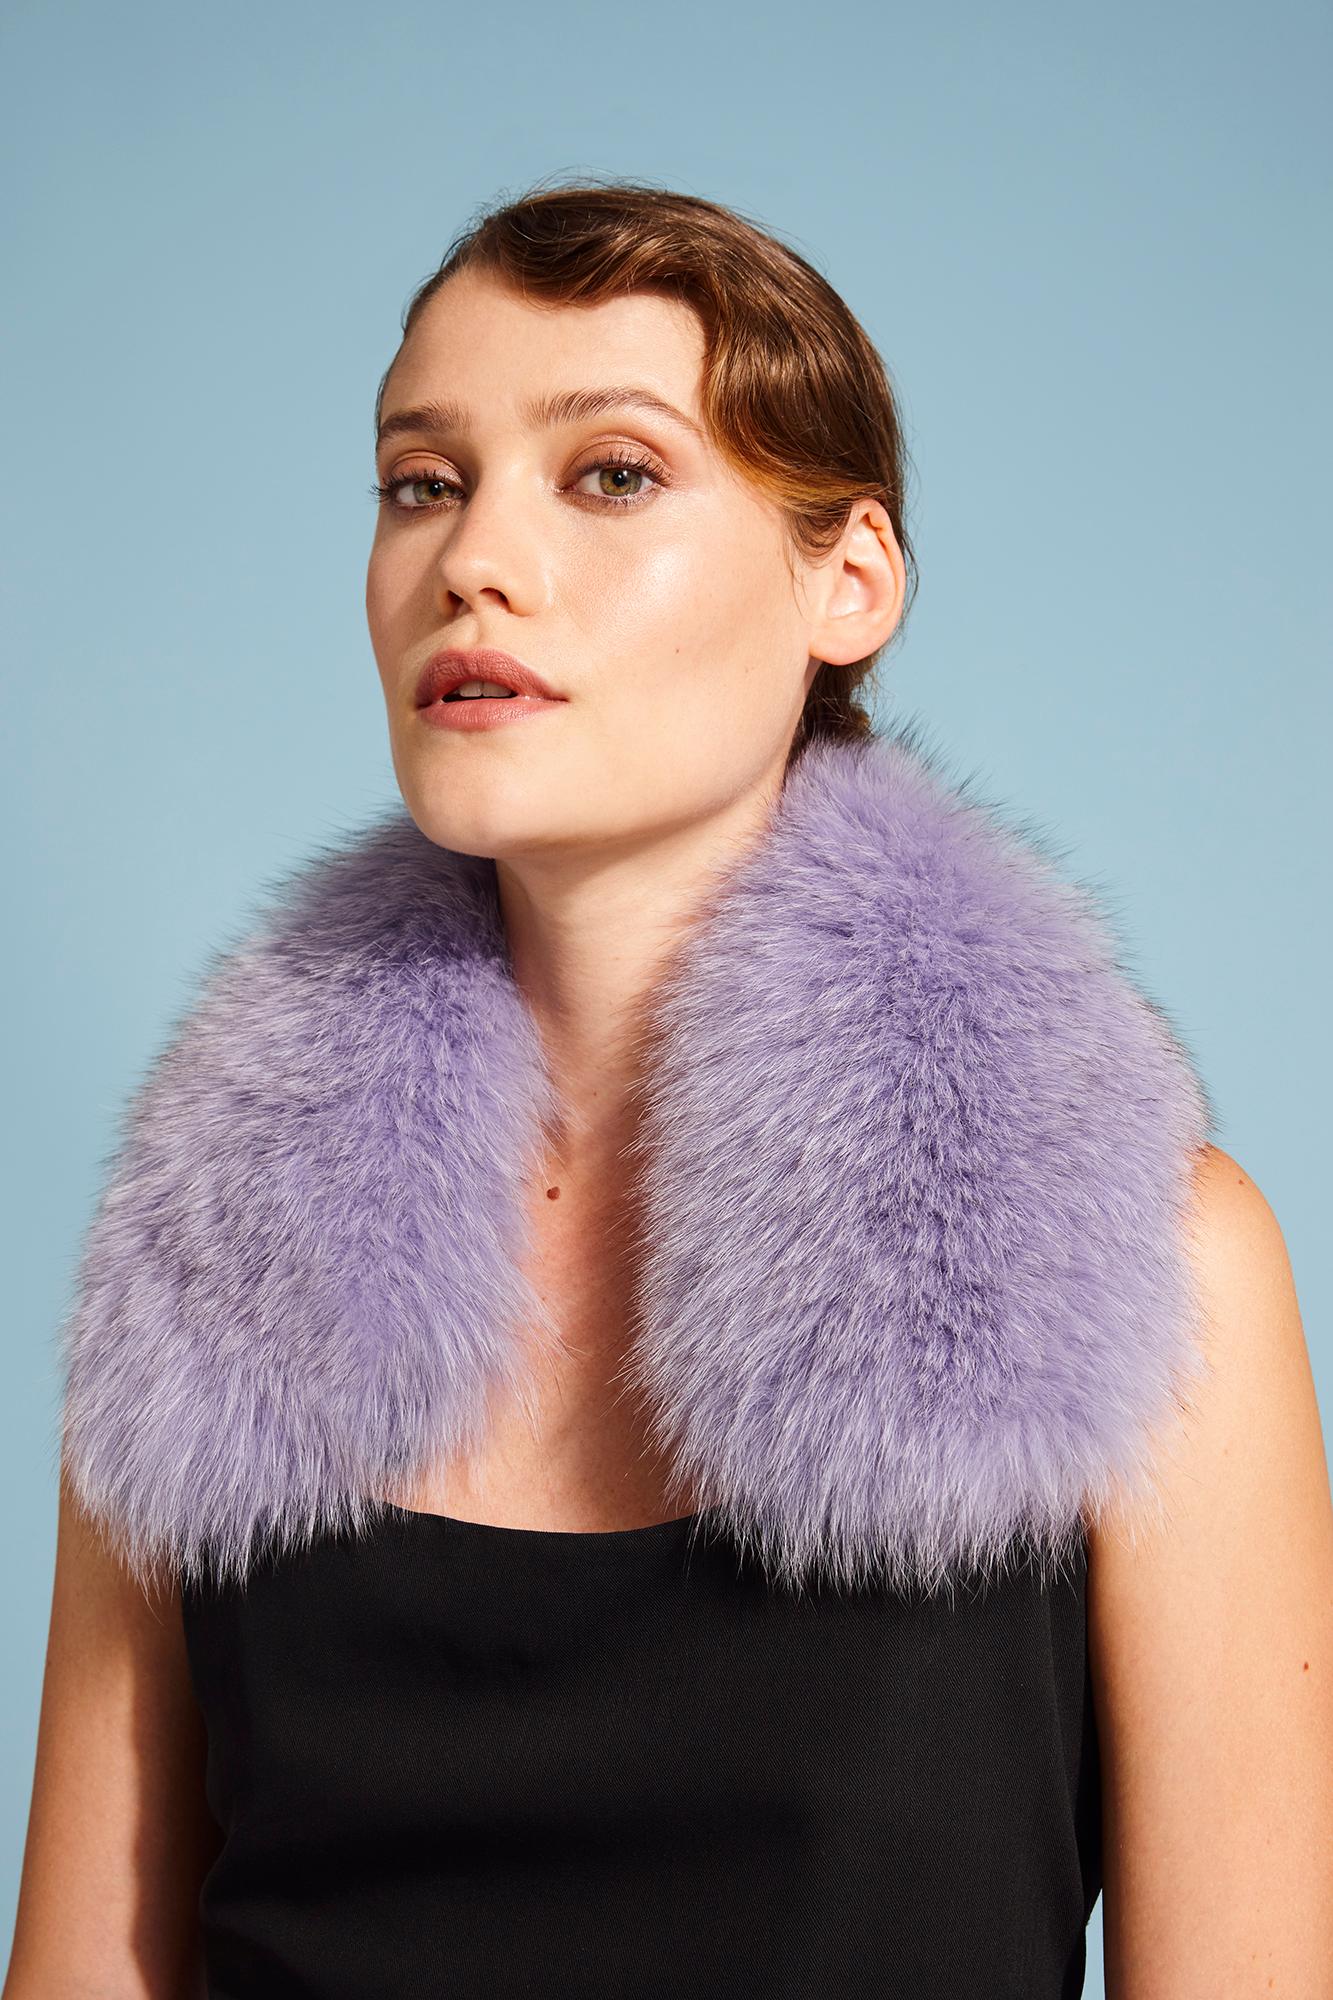 Verheyen London Peter Pan Collar in Lilac Fox Fur - Brand New 

The Peter Pan collar is Verheyen London’s classic staple for effortless style for casual wear.

The Peter Pan Collar is one Verheyen London’s casual everyday design, which is perfectly